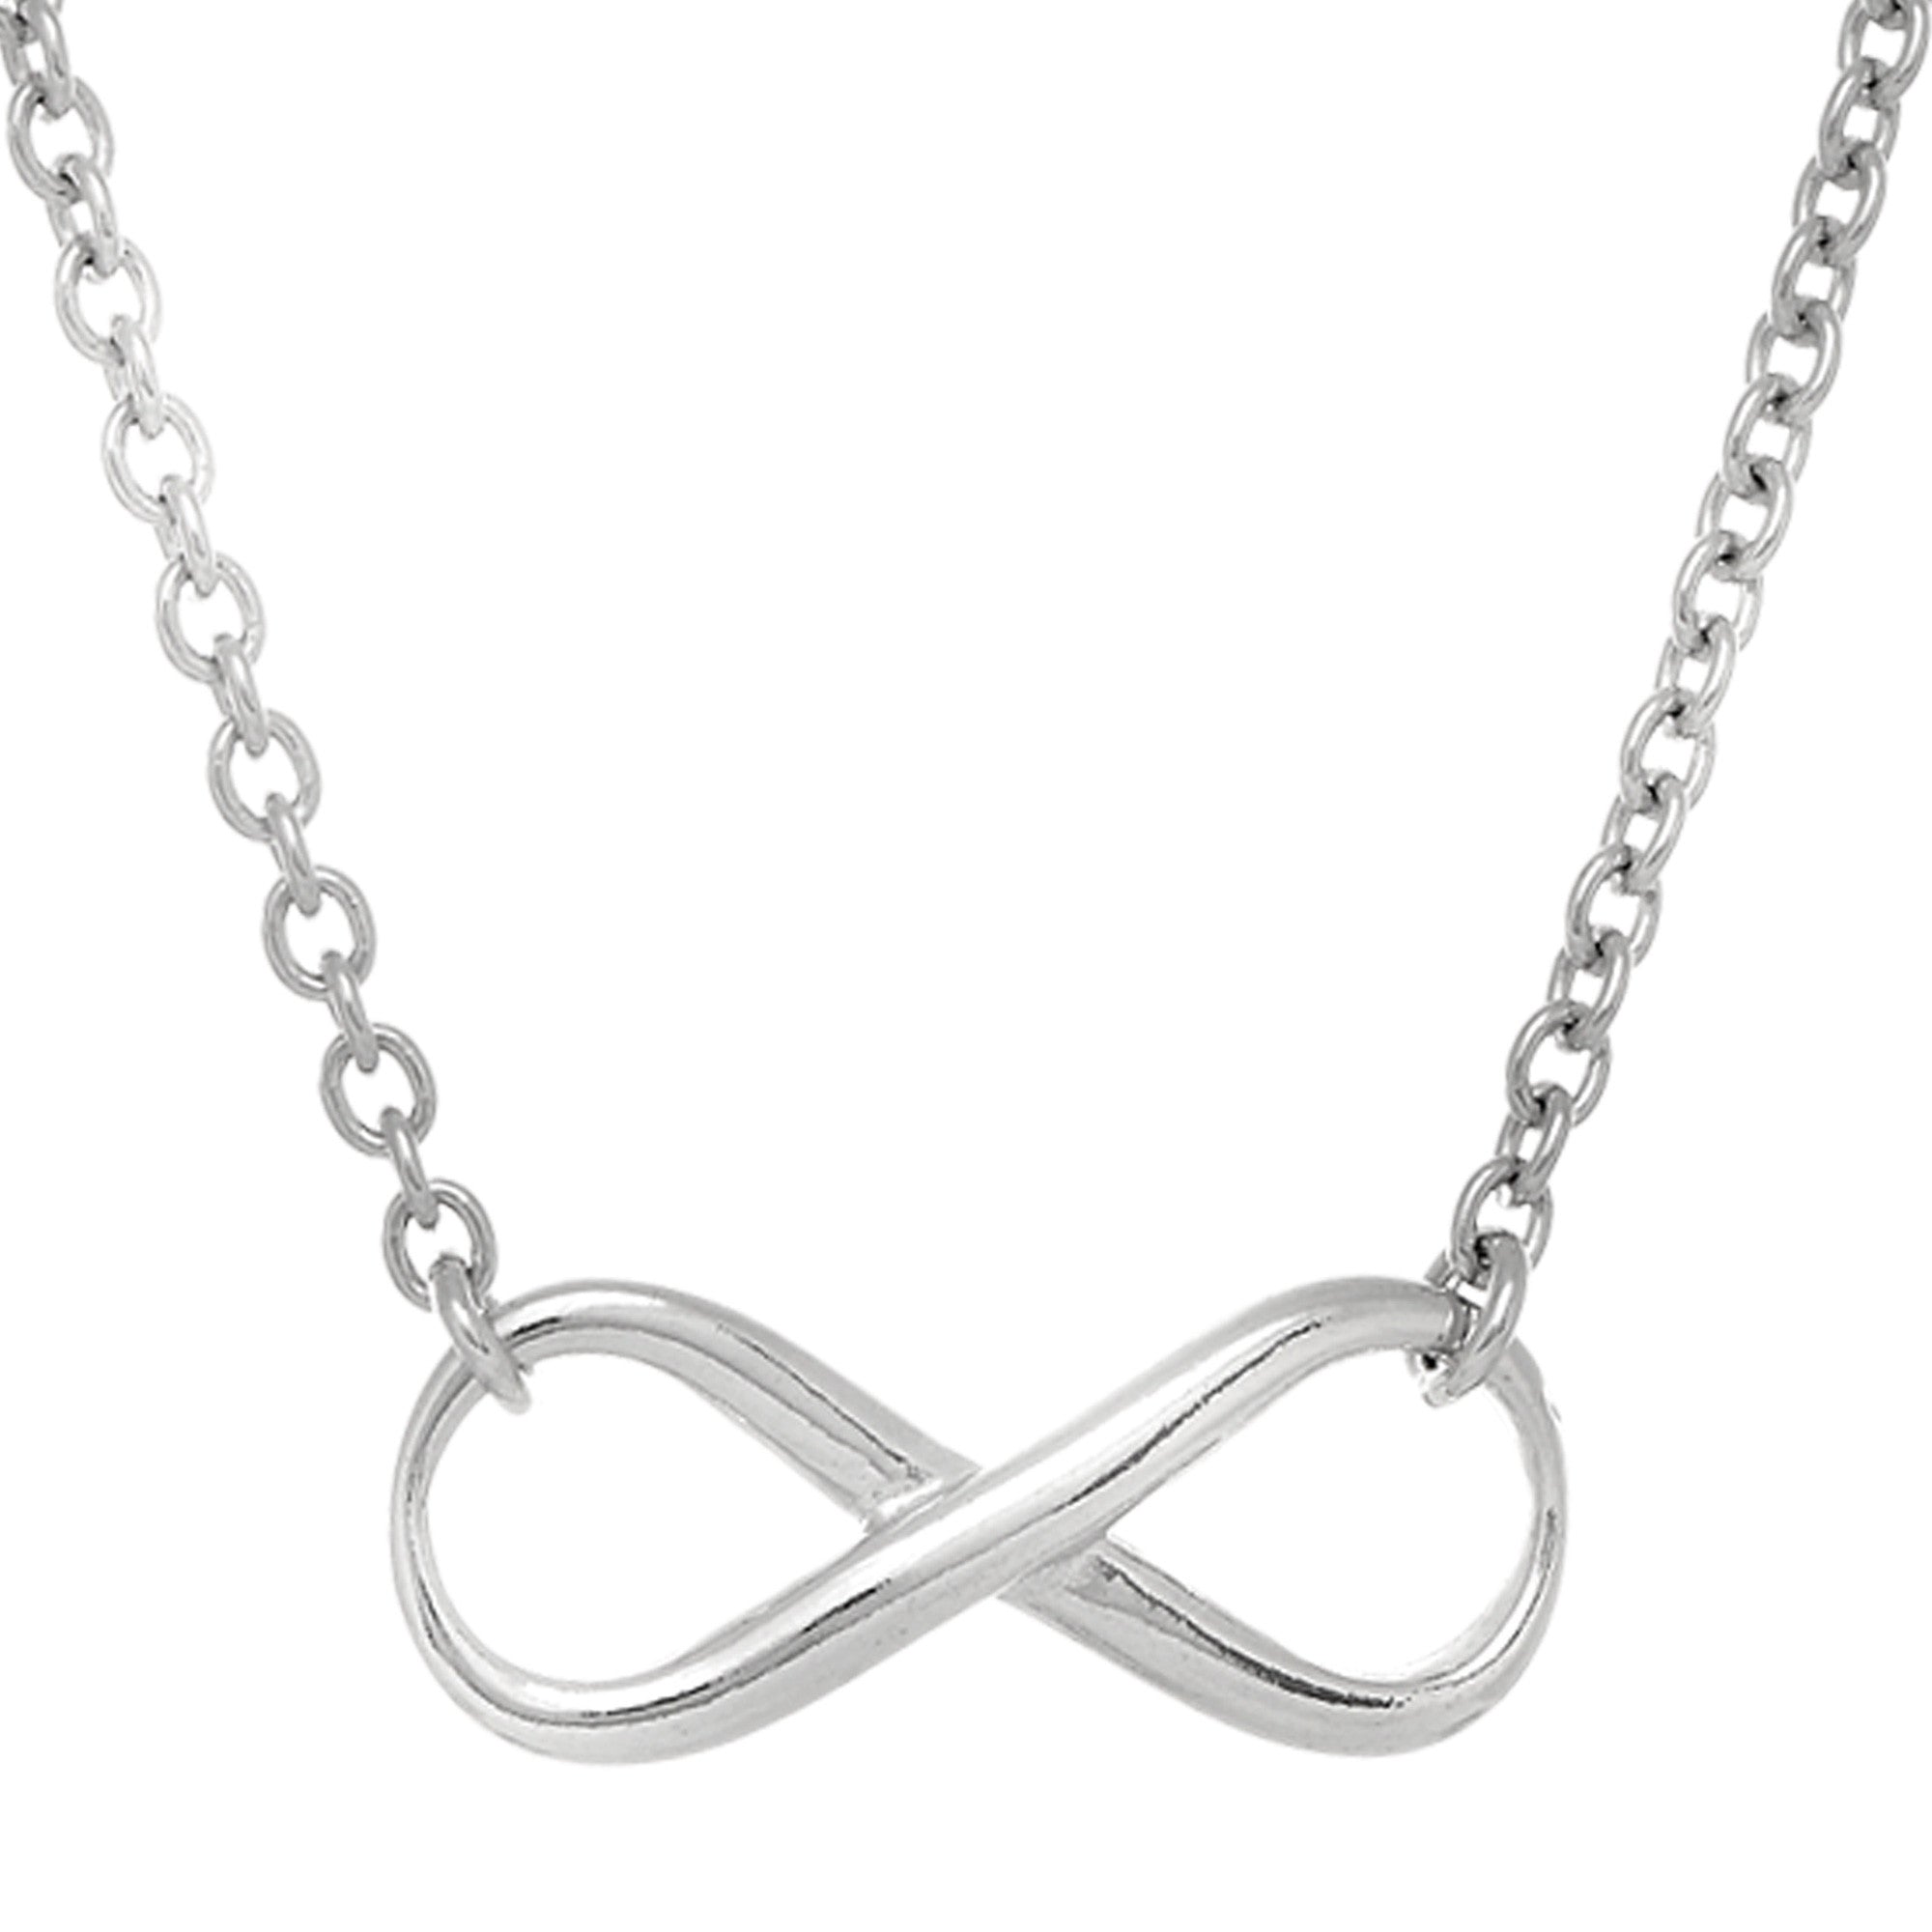 Infinity Sign Link Necklace In Rhodium Plated Sterling Silver - 18 Inches fine designer jewelry for men and women